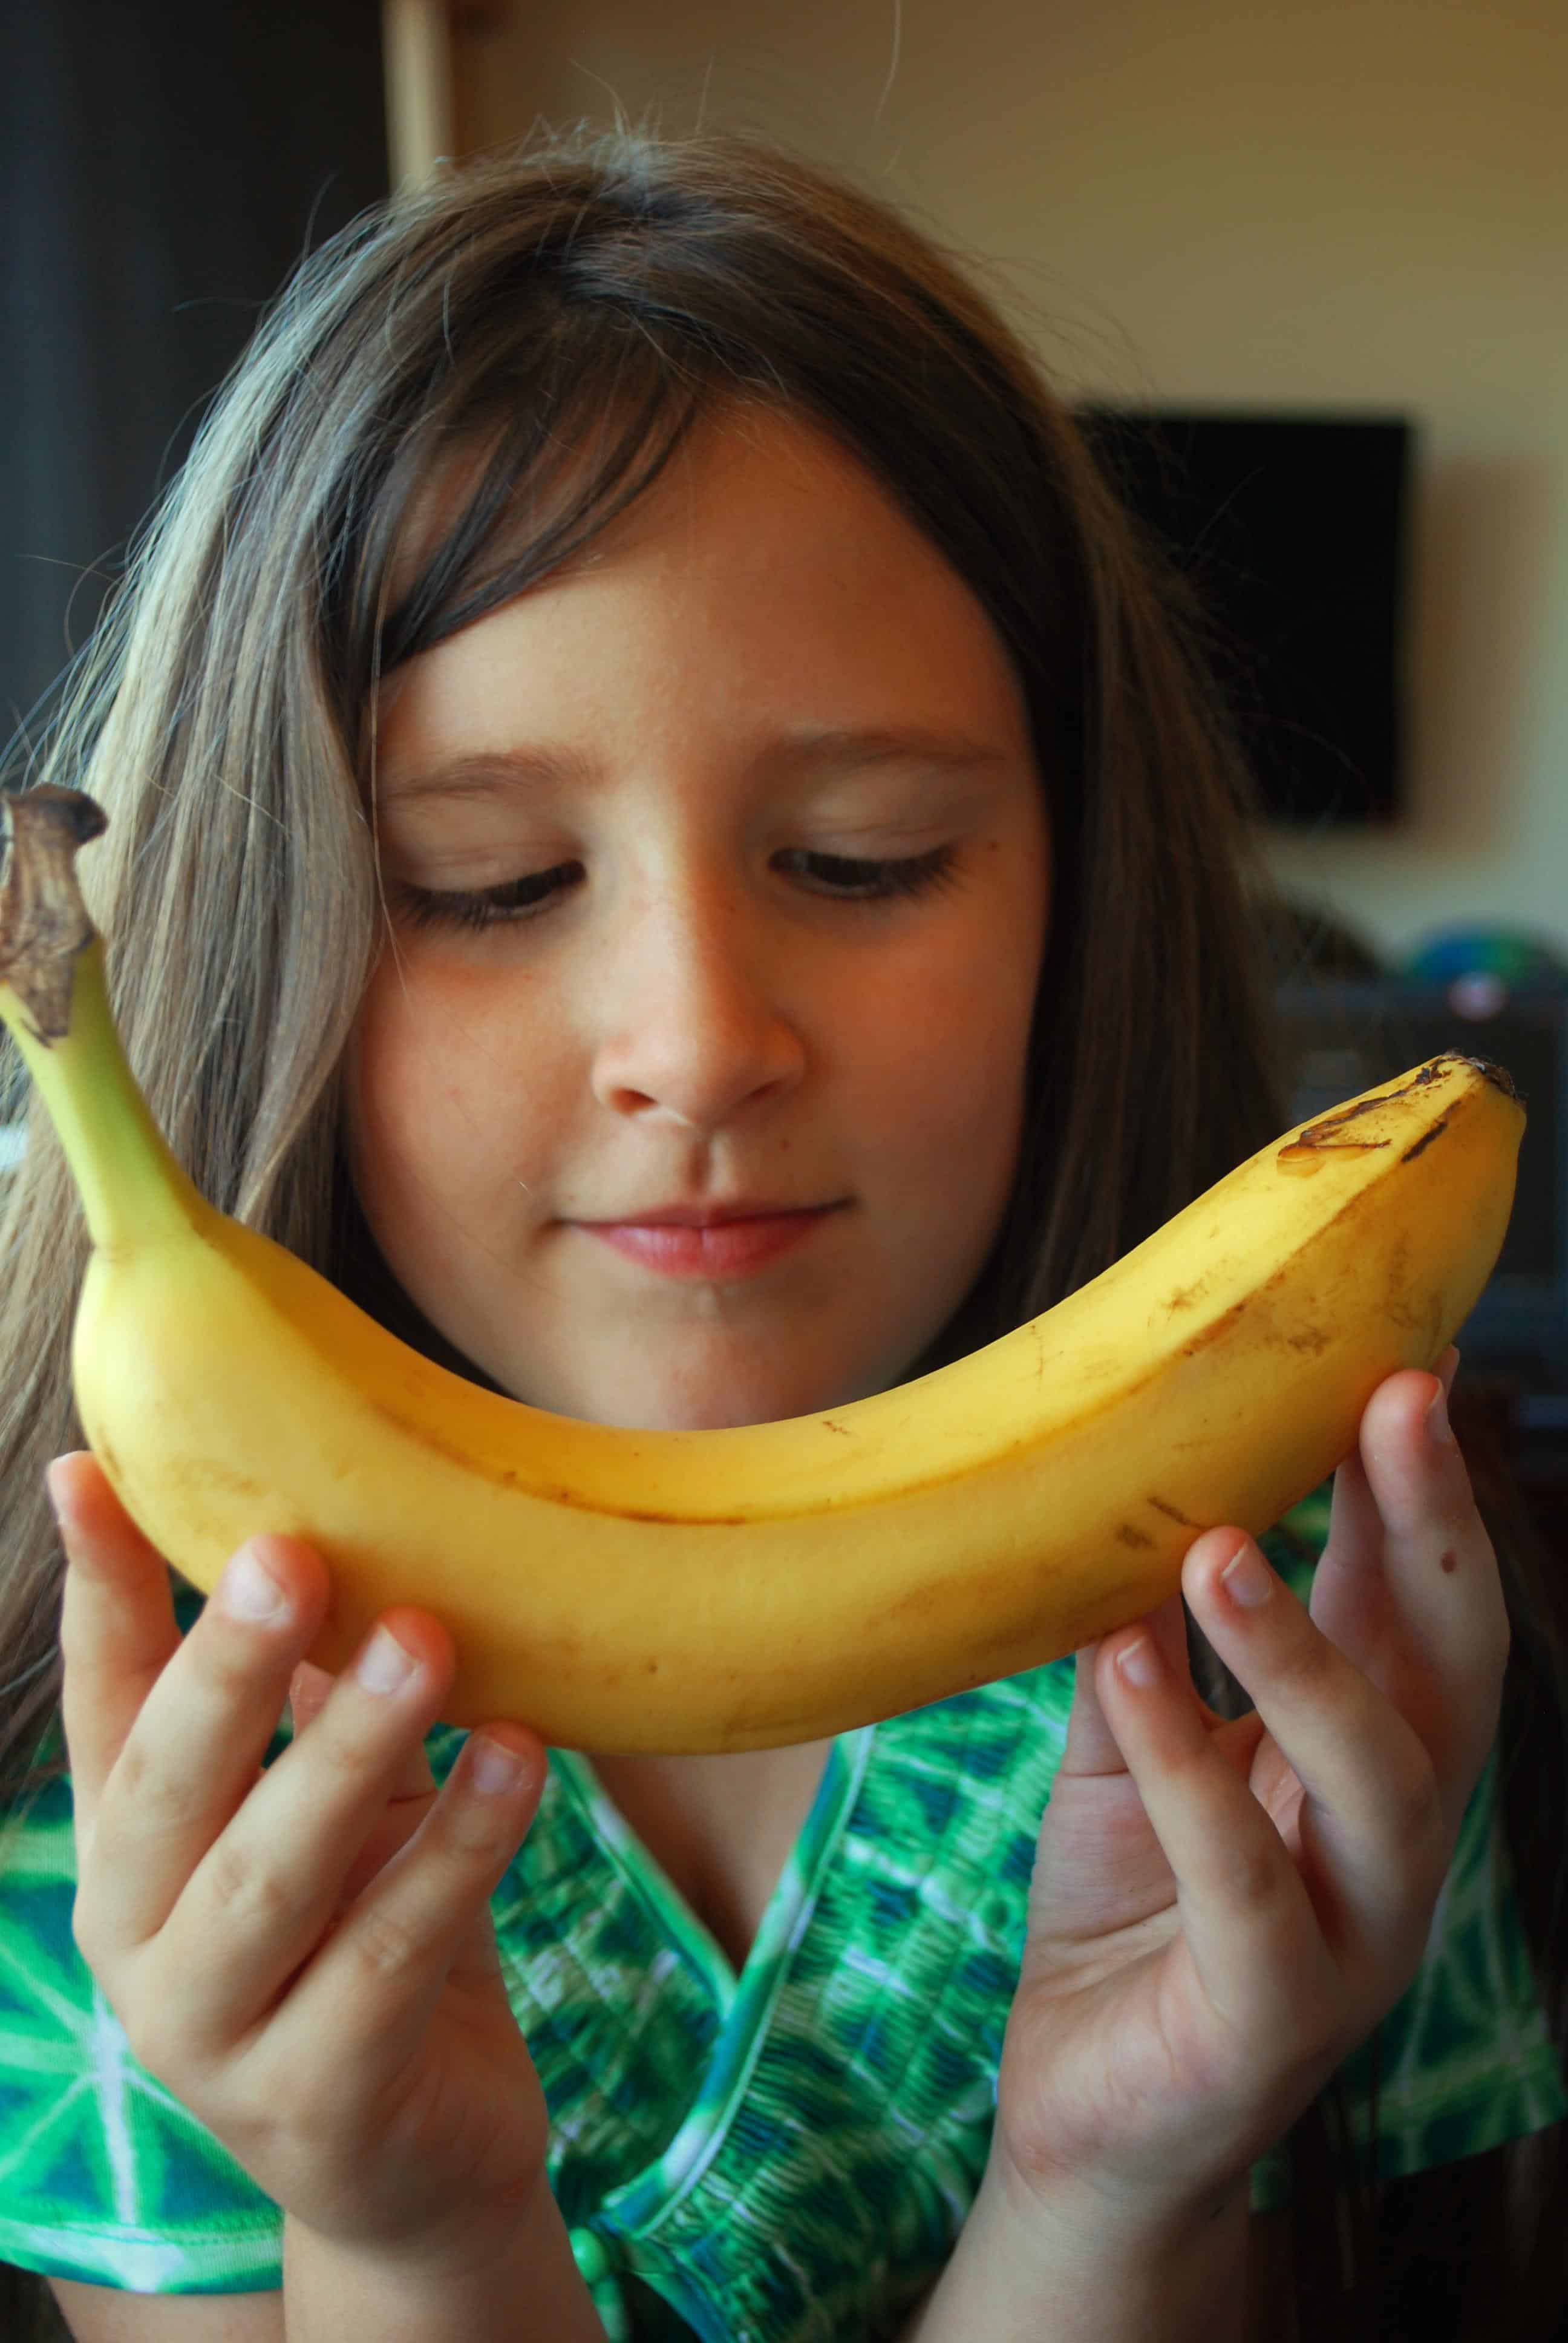 Young girl staring down at a yellow banana in her hands